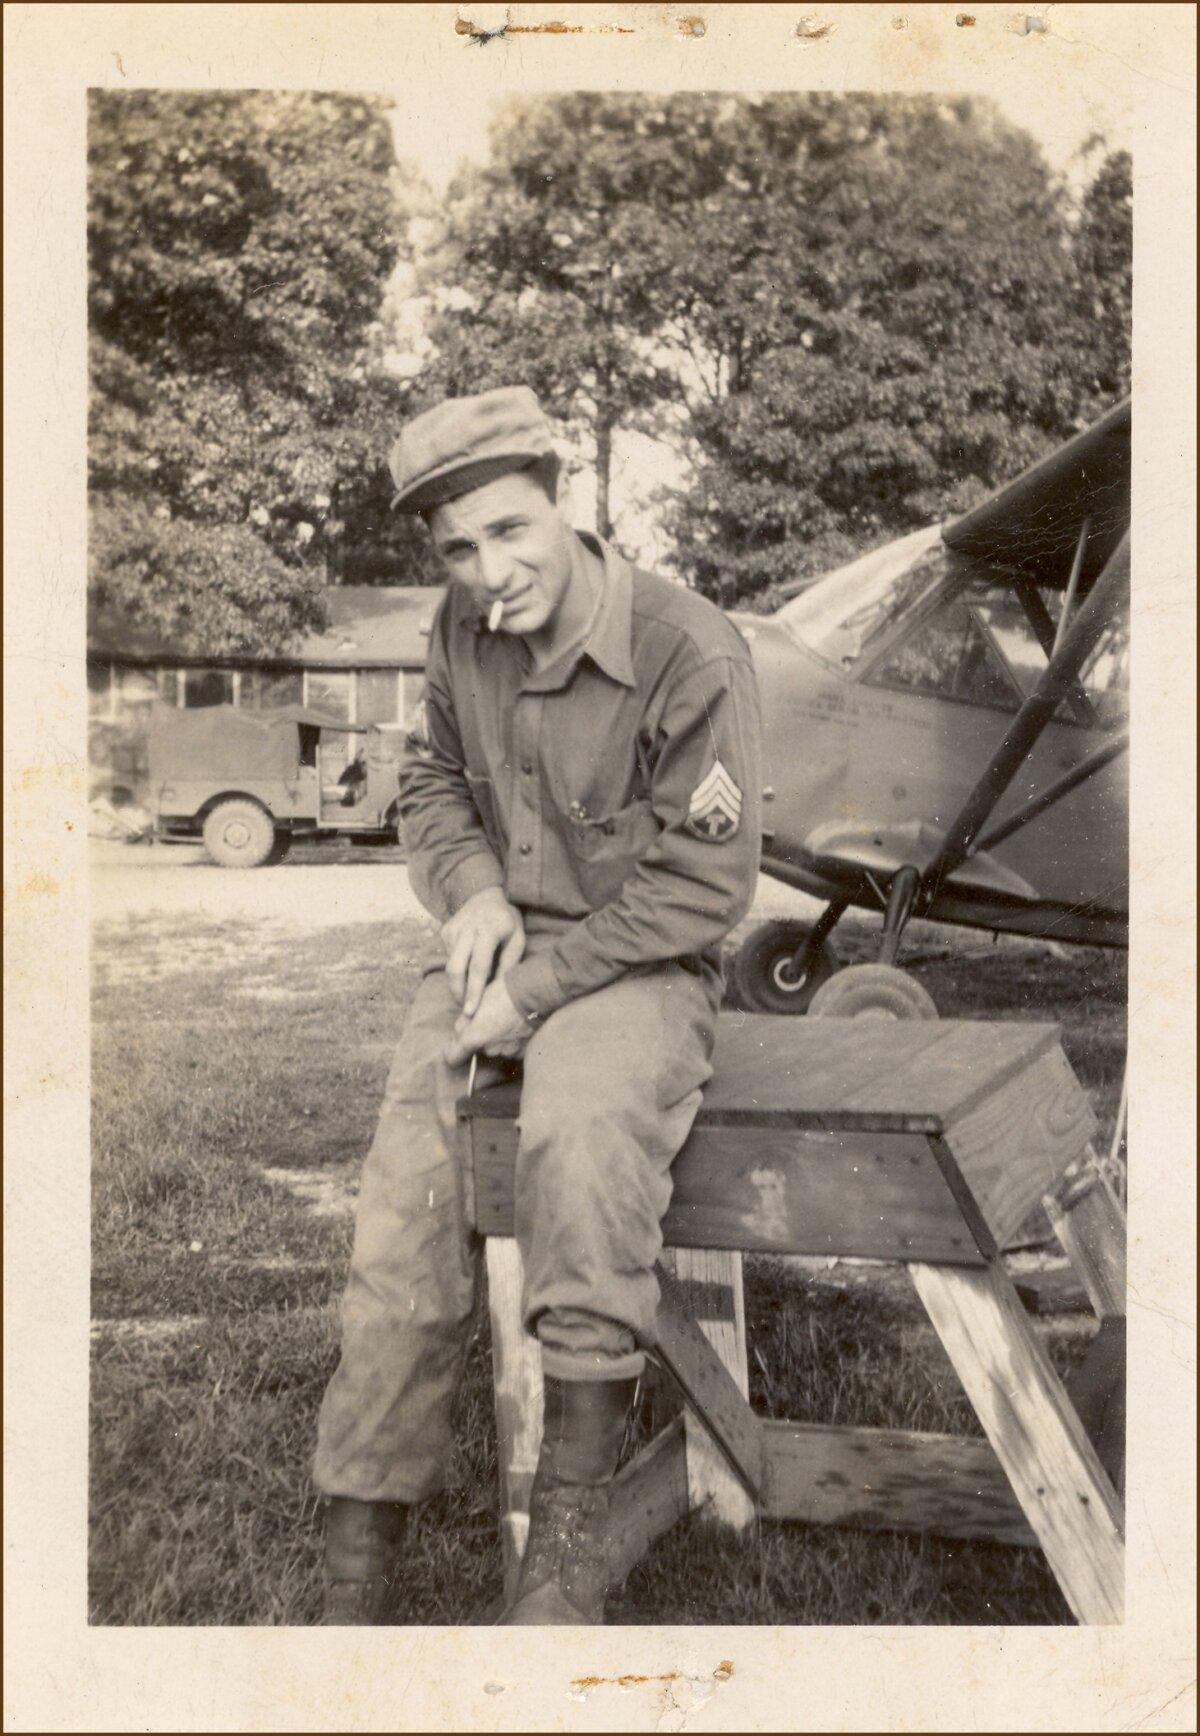 Master Sergeant Critelli while in Germany, near the end of the war. （Courtesy of Dominick Critelli）